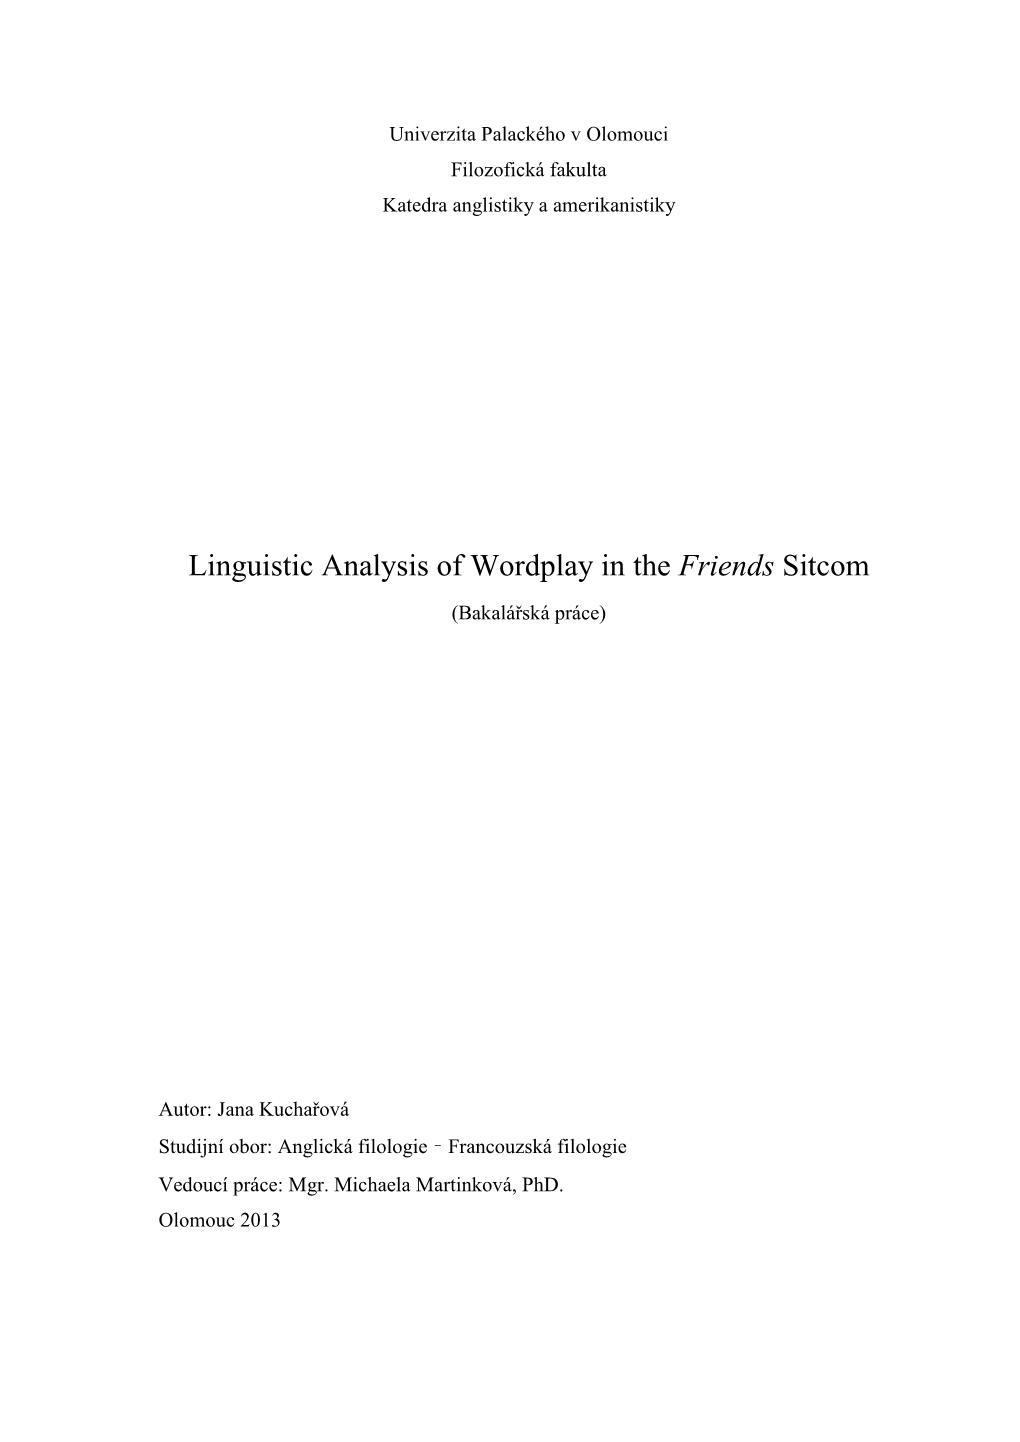 Linguistic Analysis of Wordplay in the Friends Sitcom